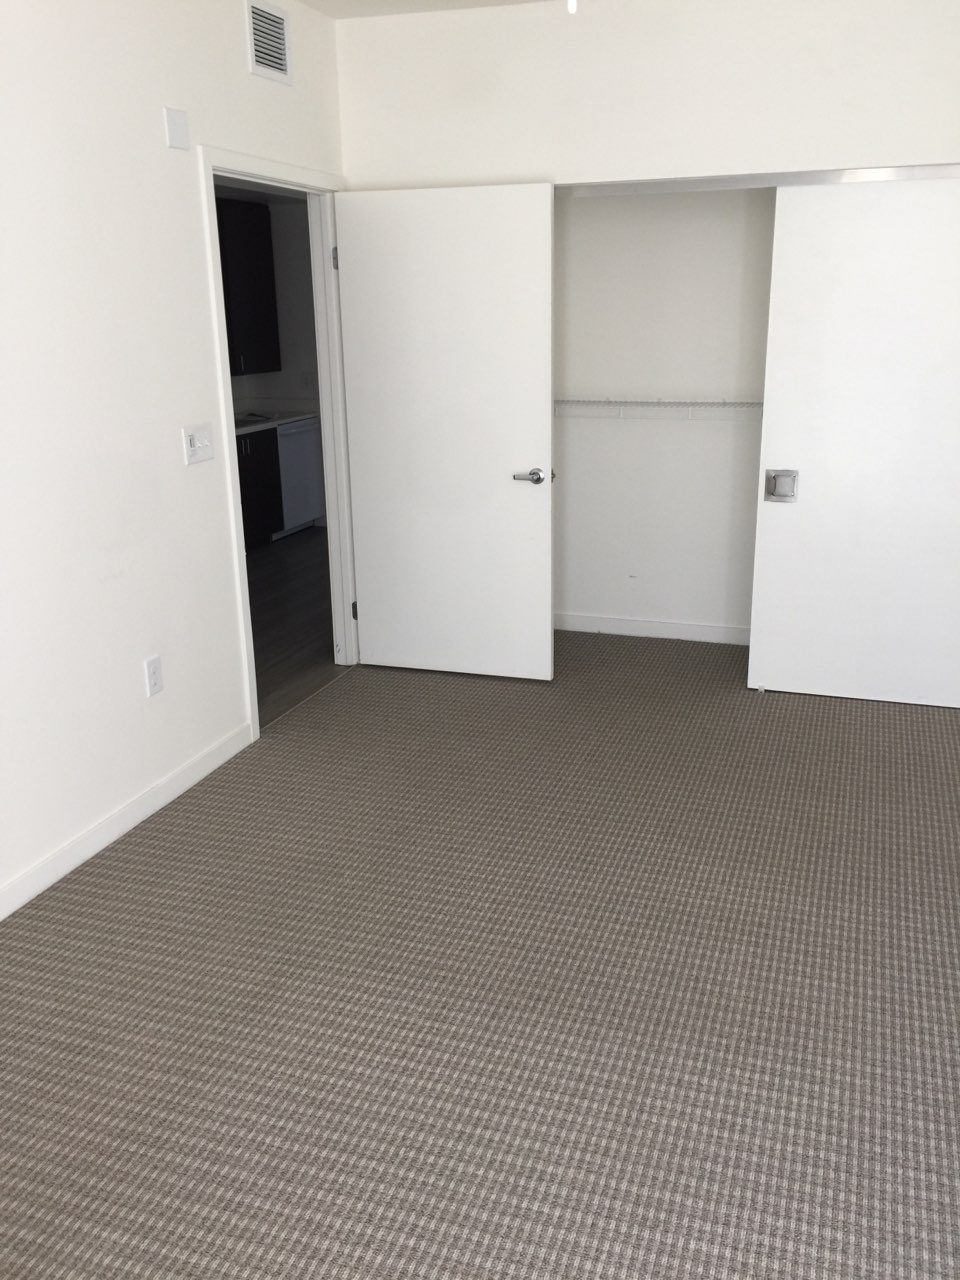 Inside view of a bedroom of a unit. Room has capet flooringand a closet with a sliding door. Walls are white.